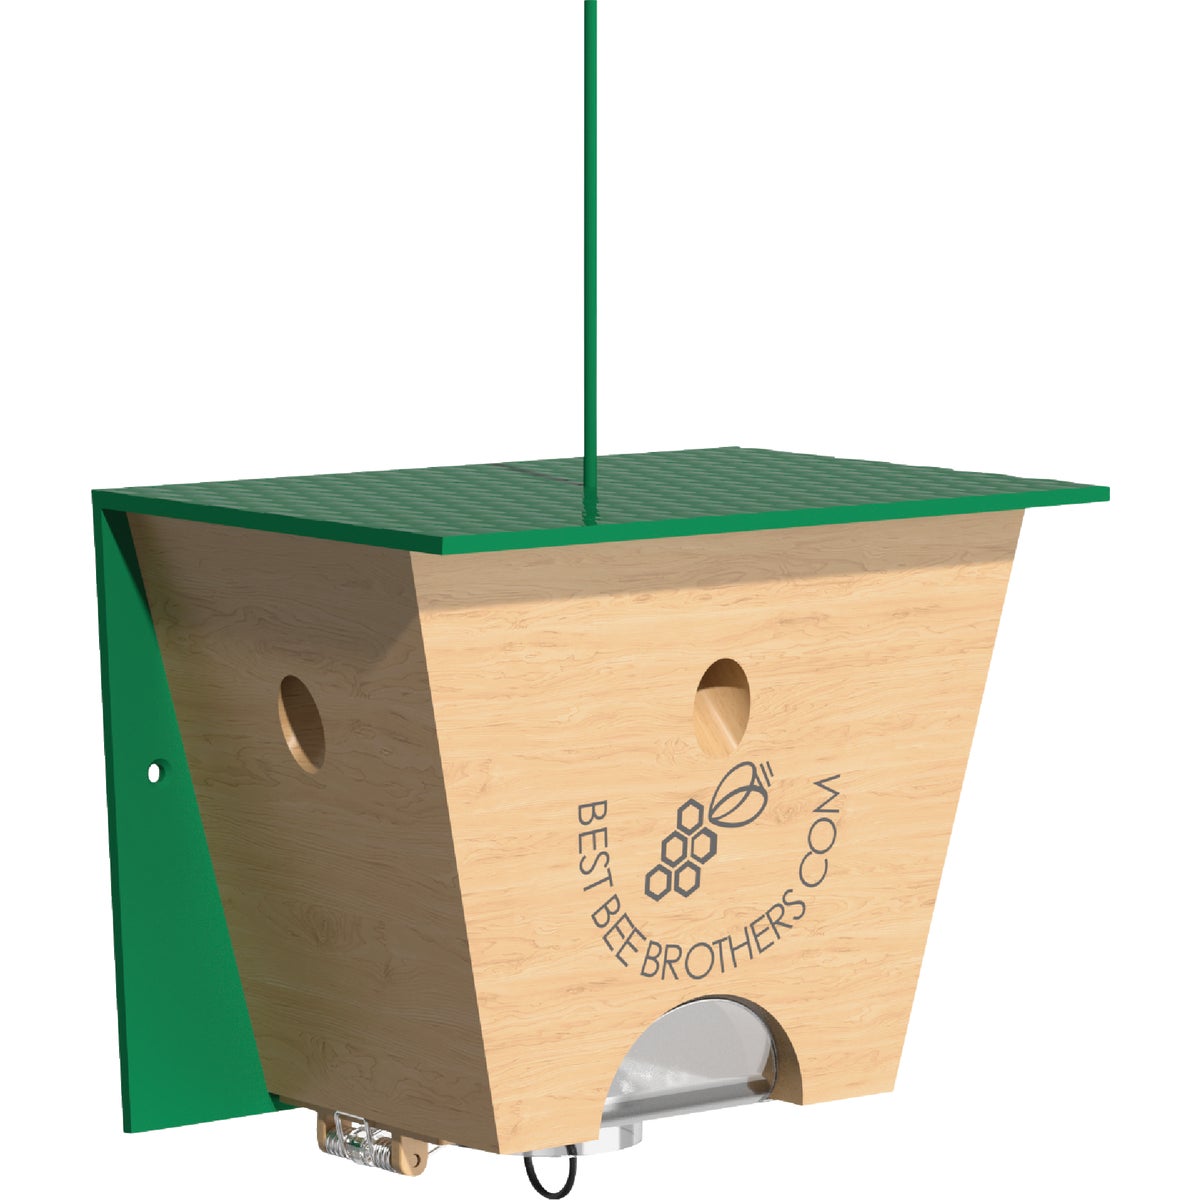 Item 704450, Trap designed to naturally draw carpenter bees in.